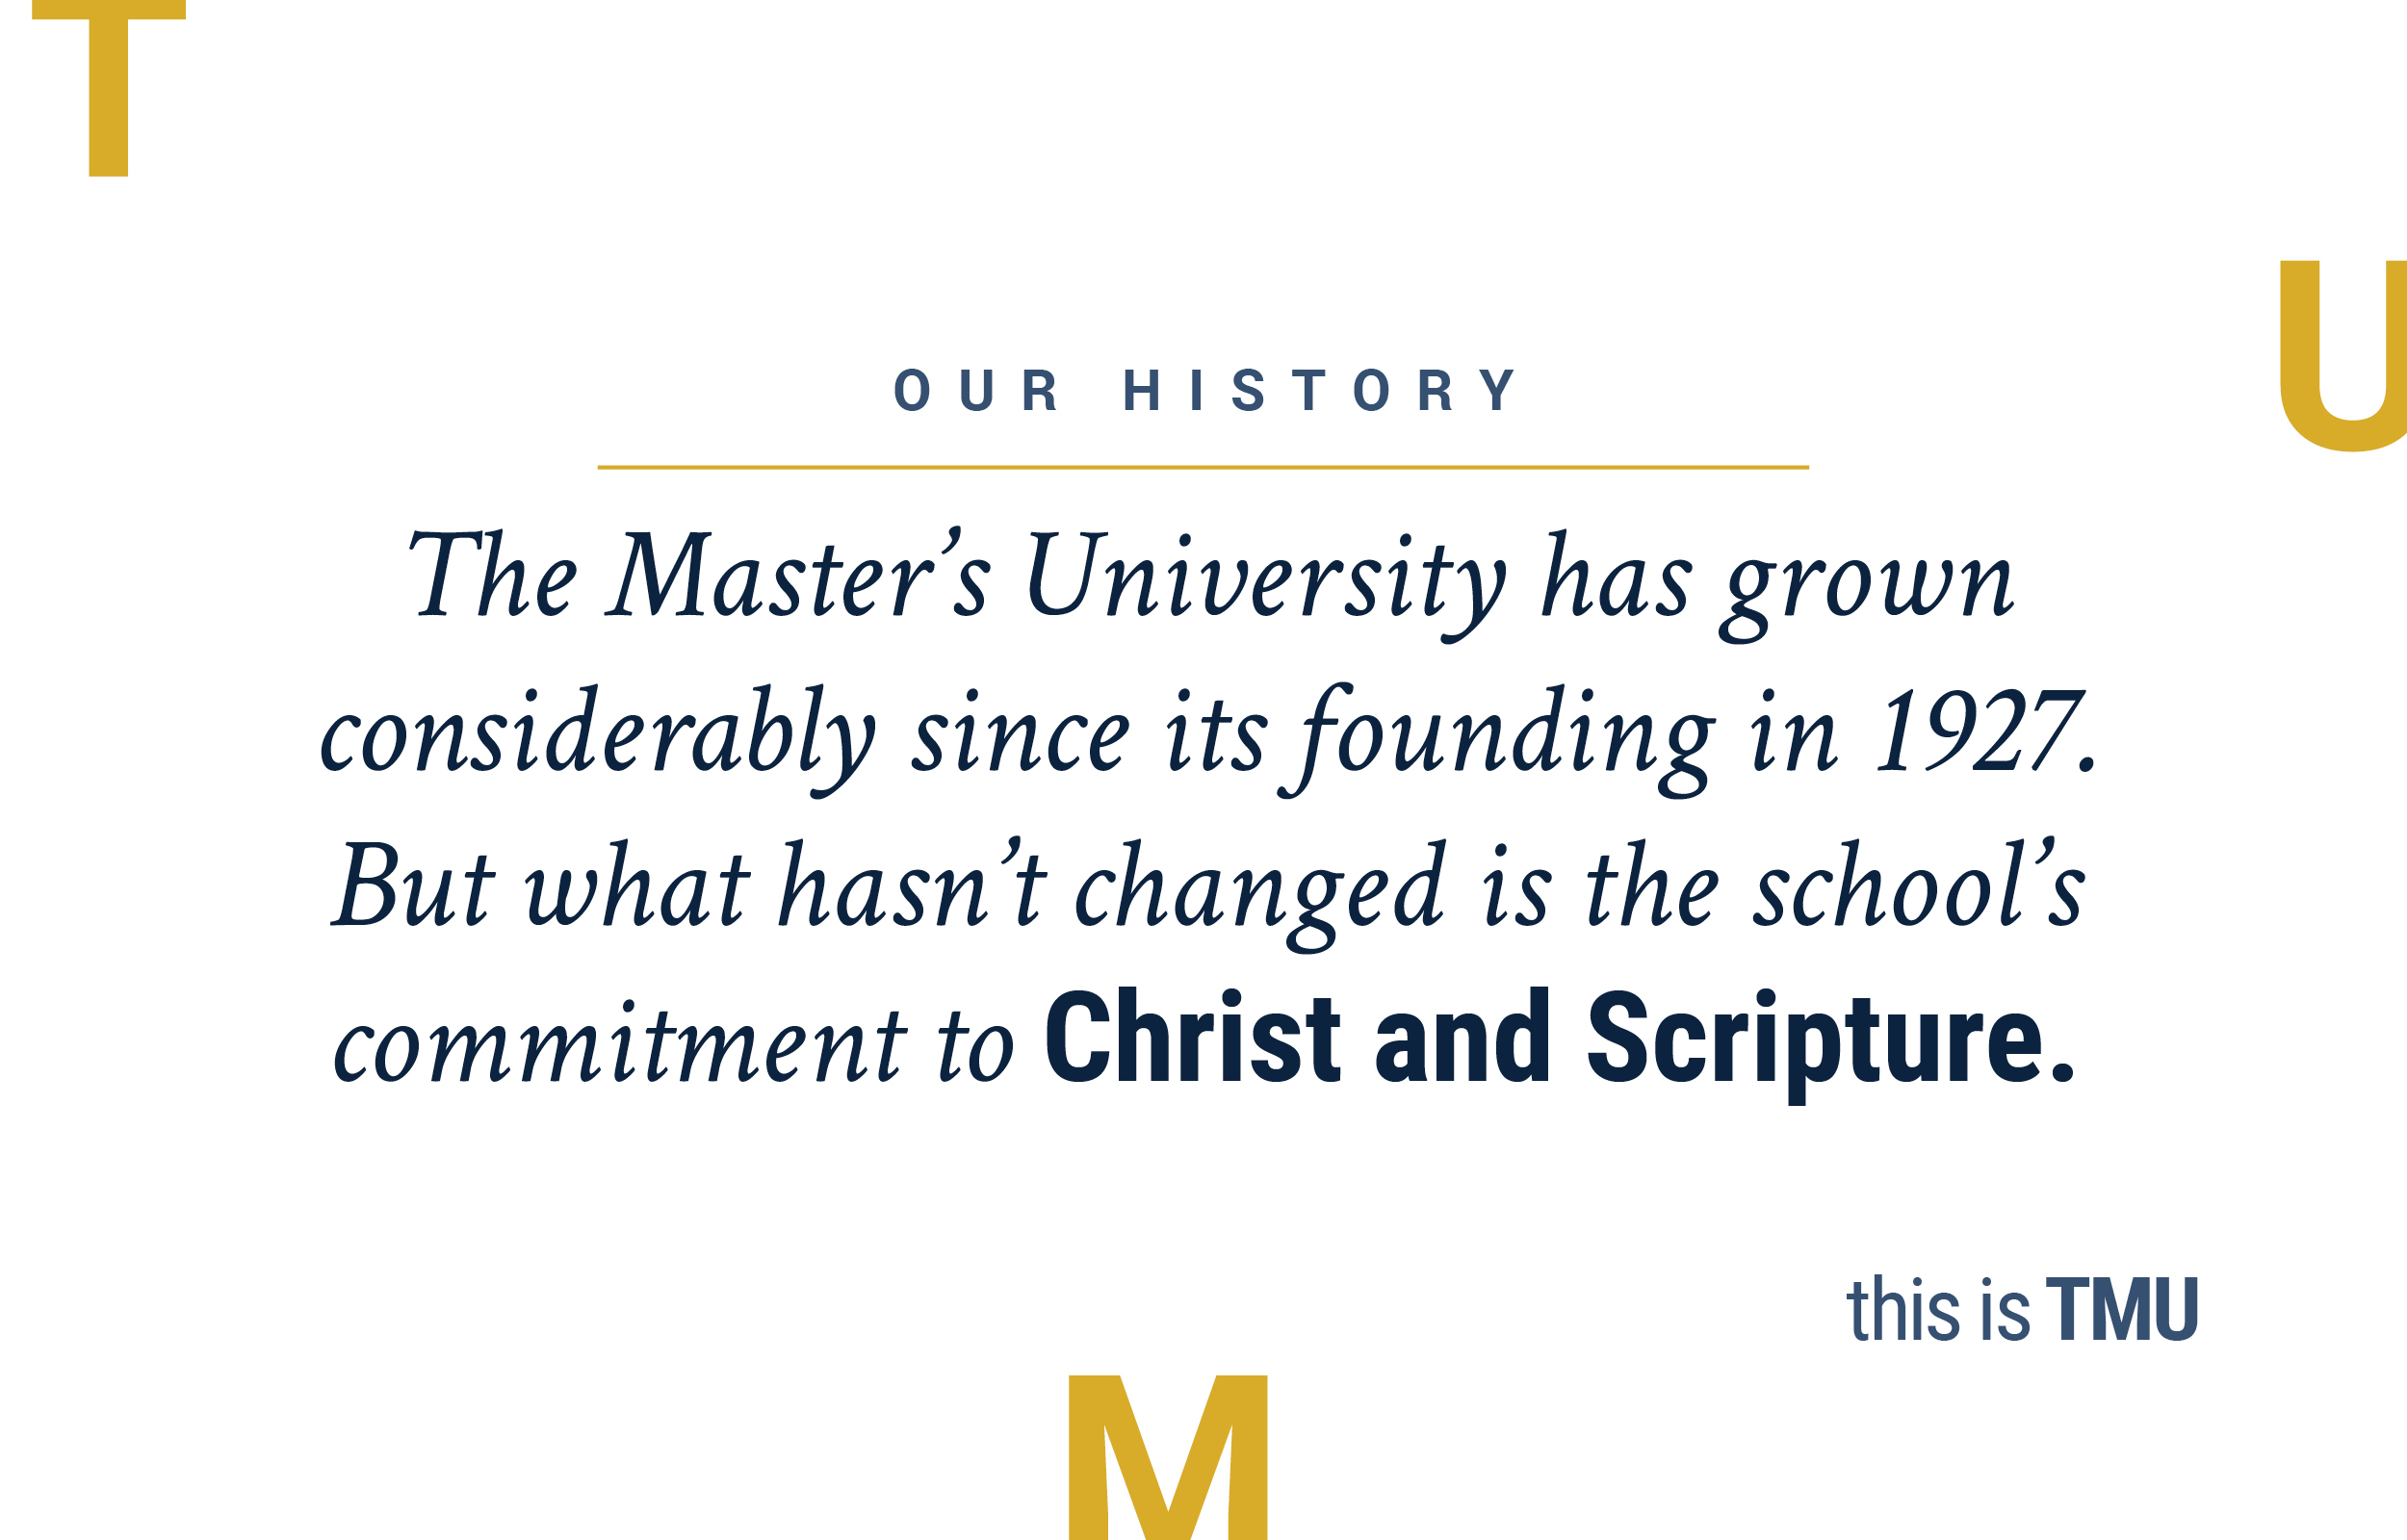 This is TMU: Our History